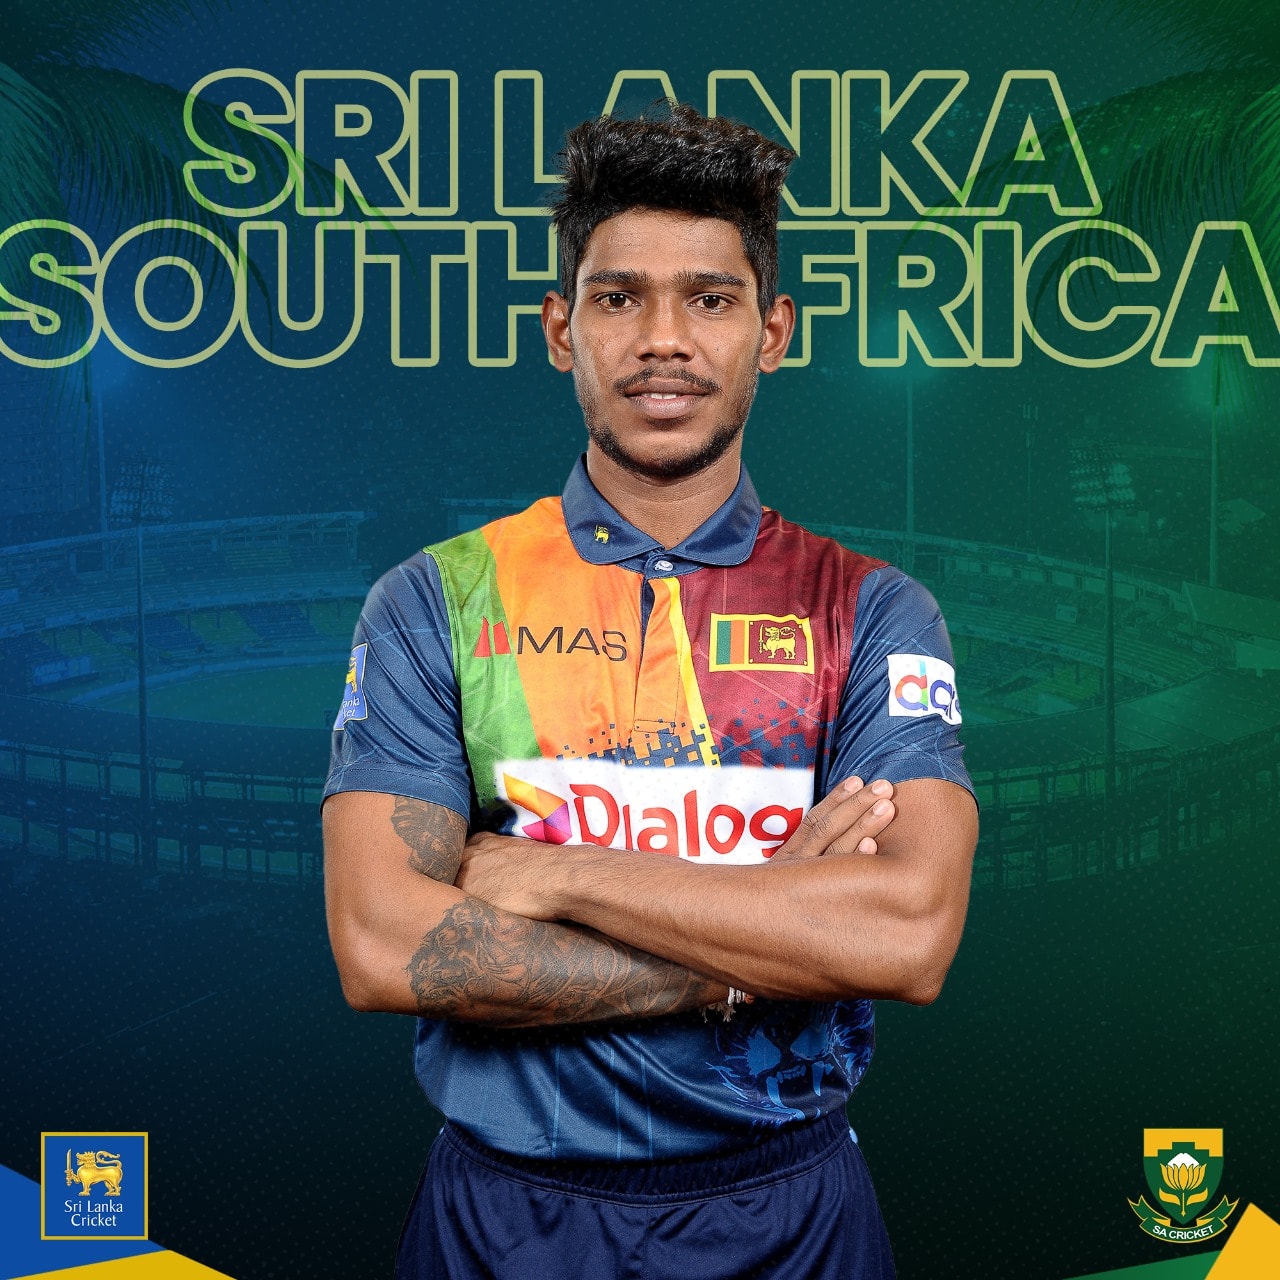 Here's Srilankan squad for the T20I series vs south Africa